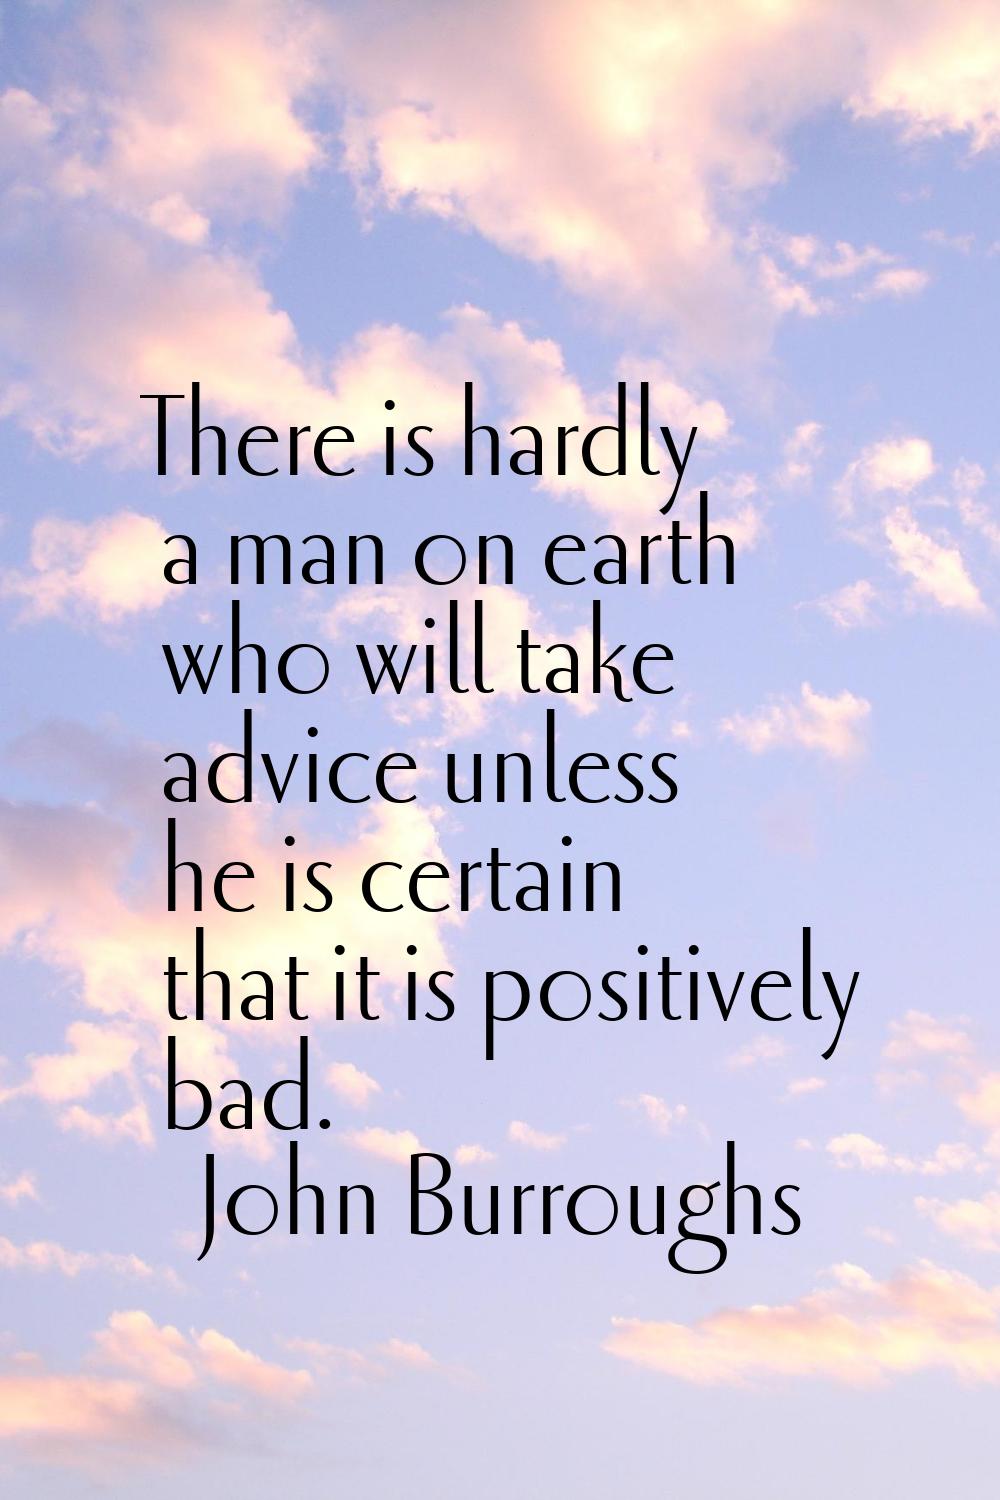 There is hardly a man on earth who will take advice unless he is certain that it is positively bad.